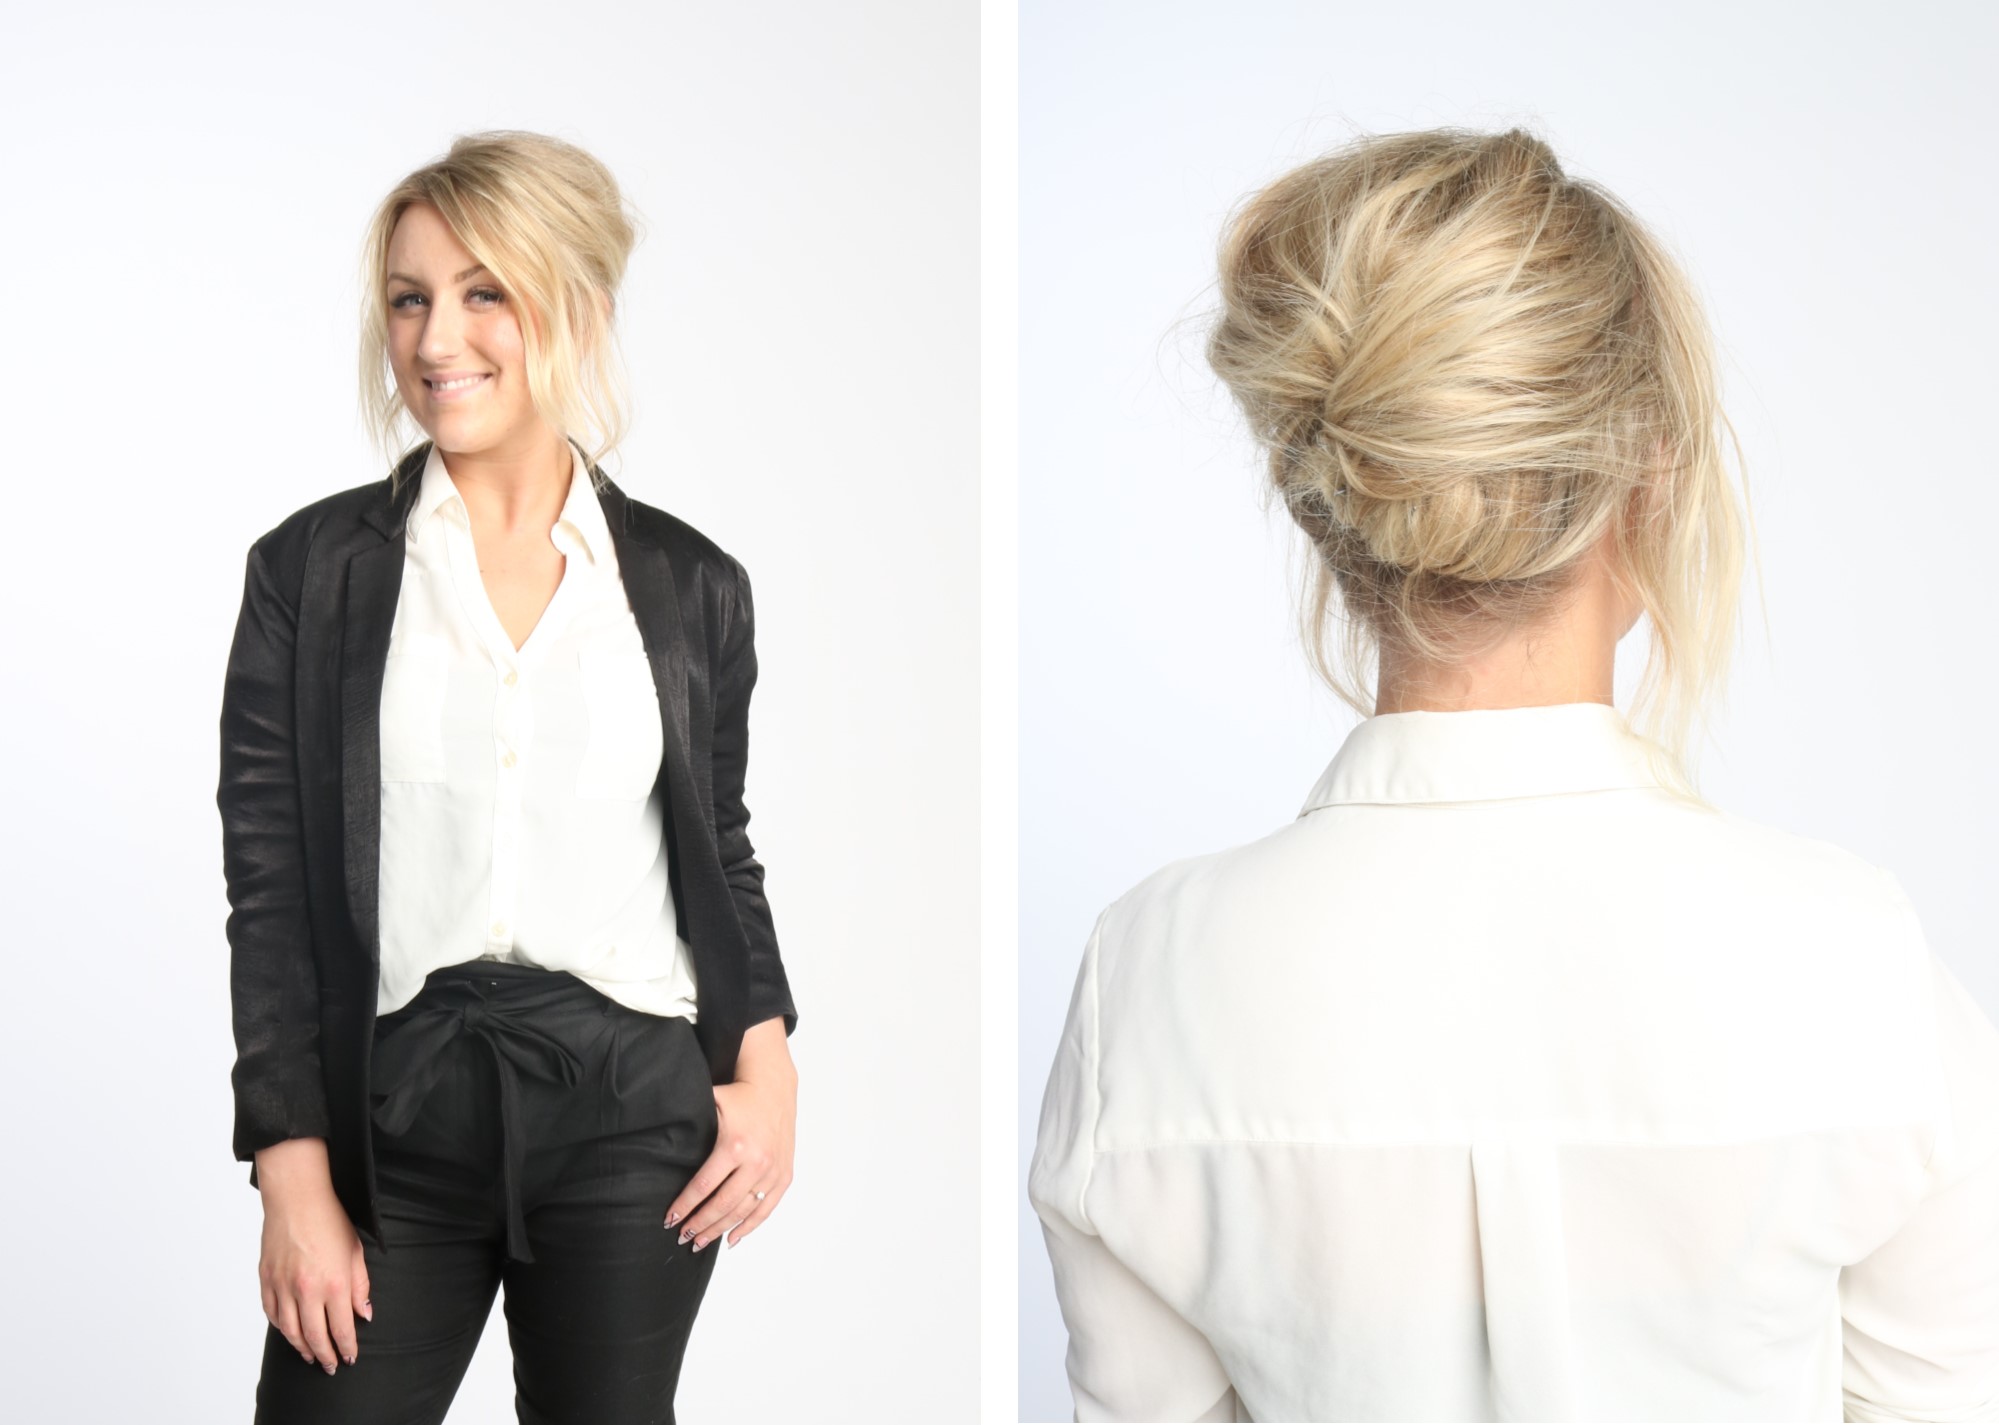 hannah, chignon, stylist, master, aveda, professional, office, hair, hairstyle, step by step